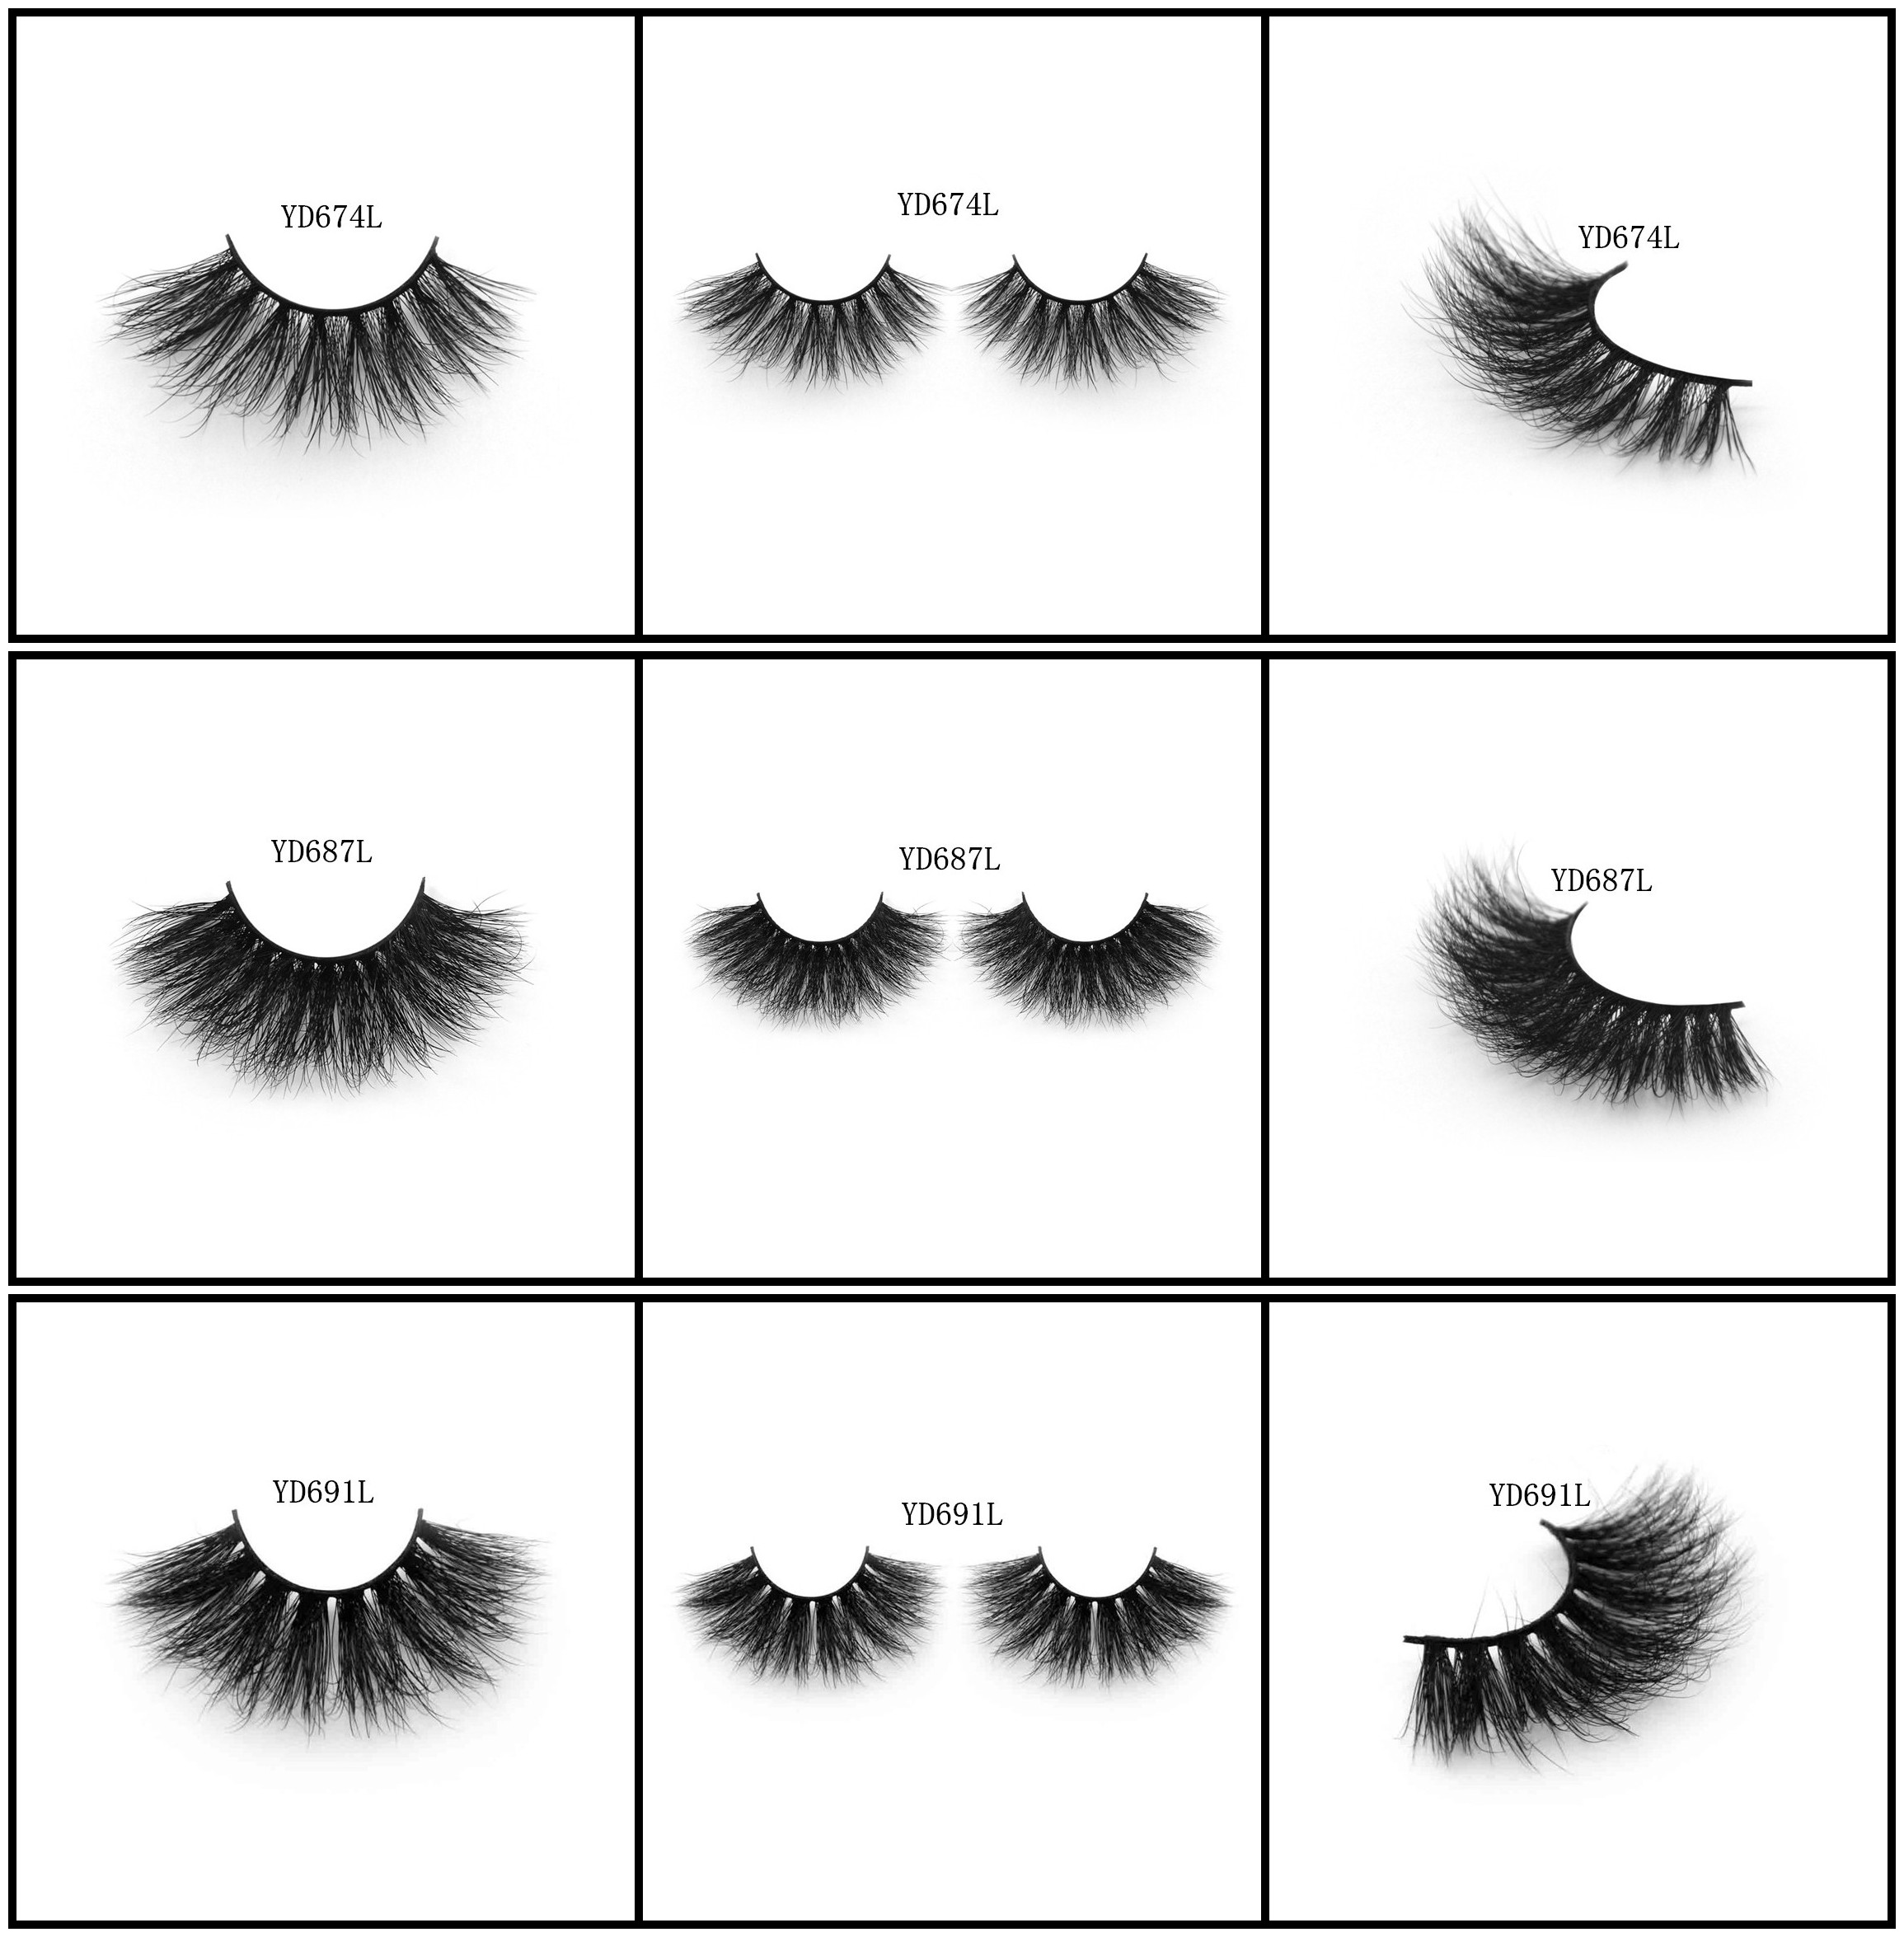 3D curls mink hair lashes quality long mink hair material from Alibaba